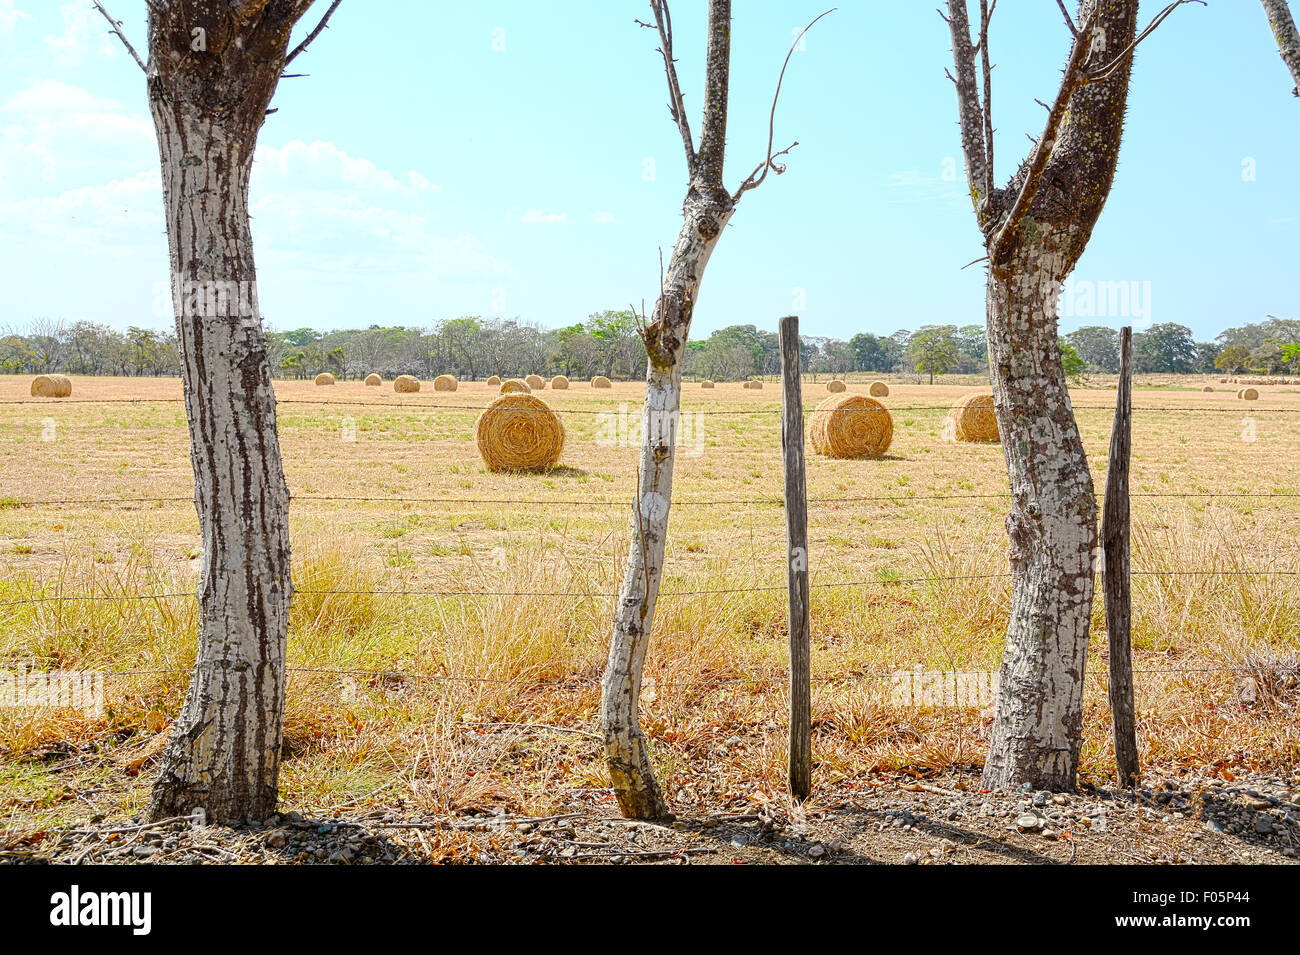 Farm field with hay bales looking through a barbwire fence in rural Panama Stock Photo